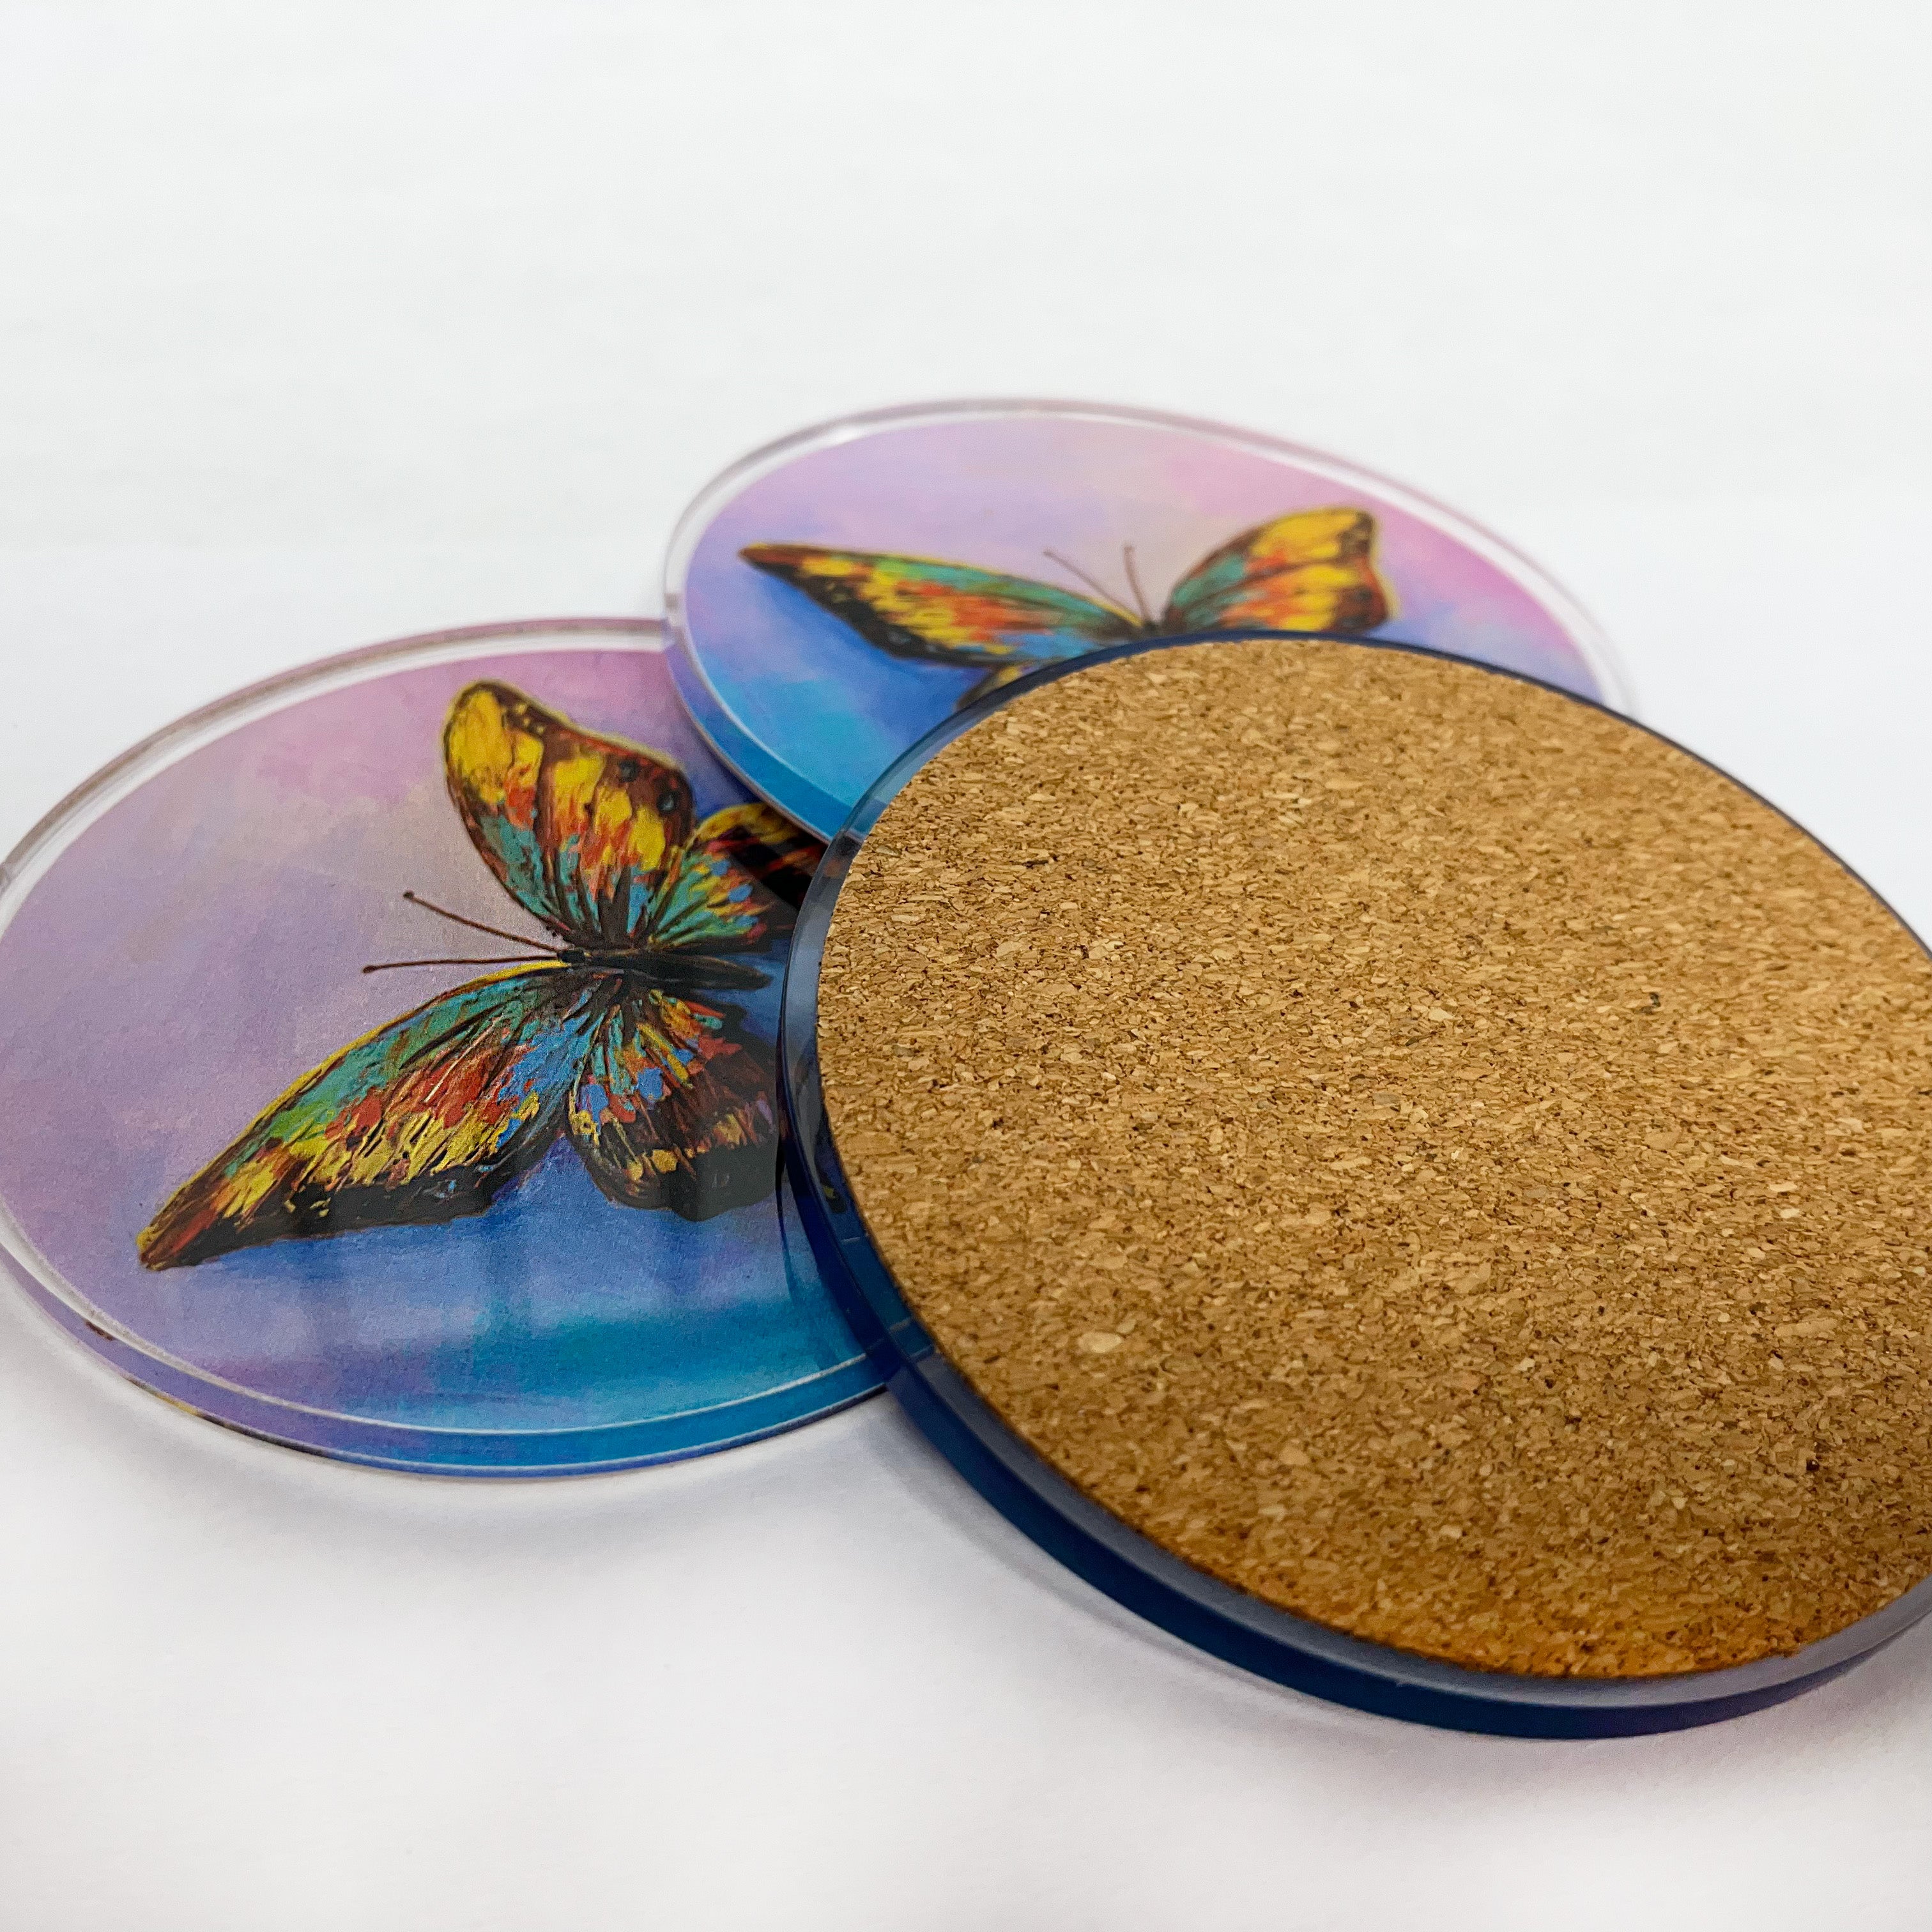 3 acrylic coasters of printed artwork laying on a table with one turned over to show cork backer.